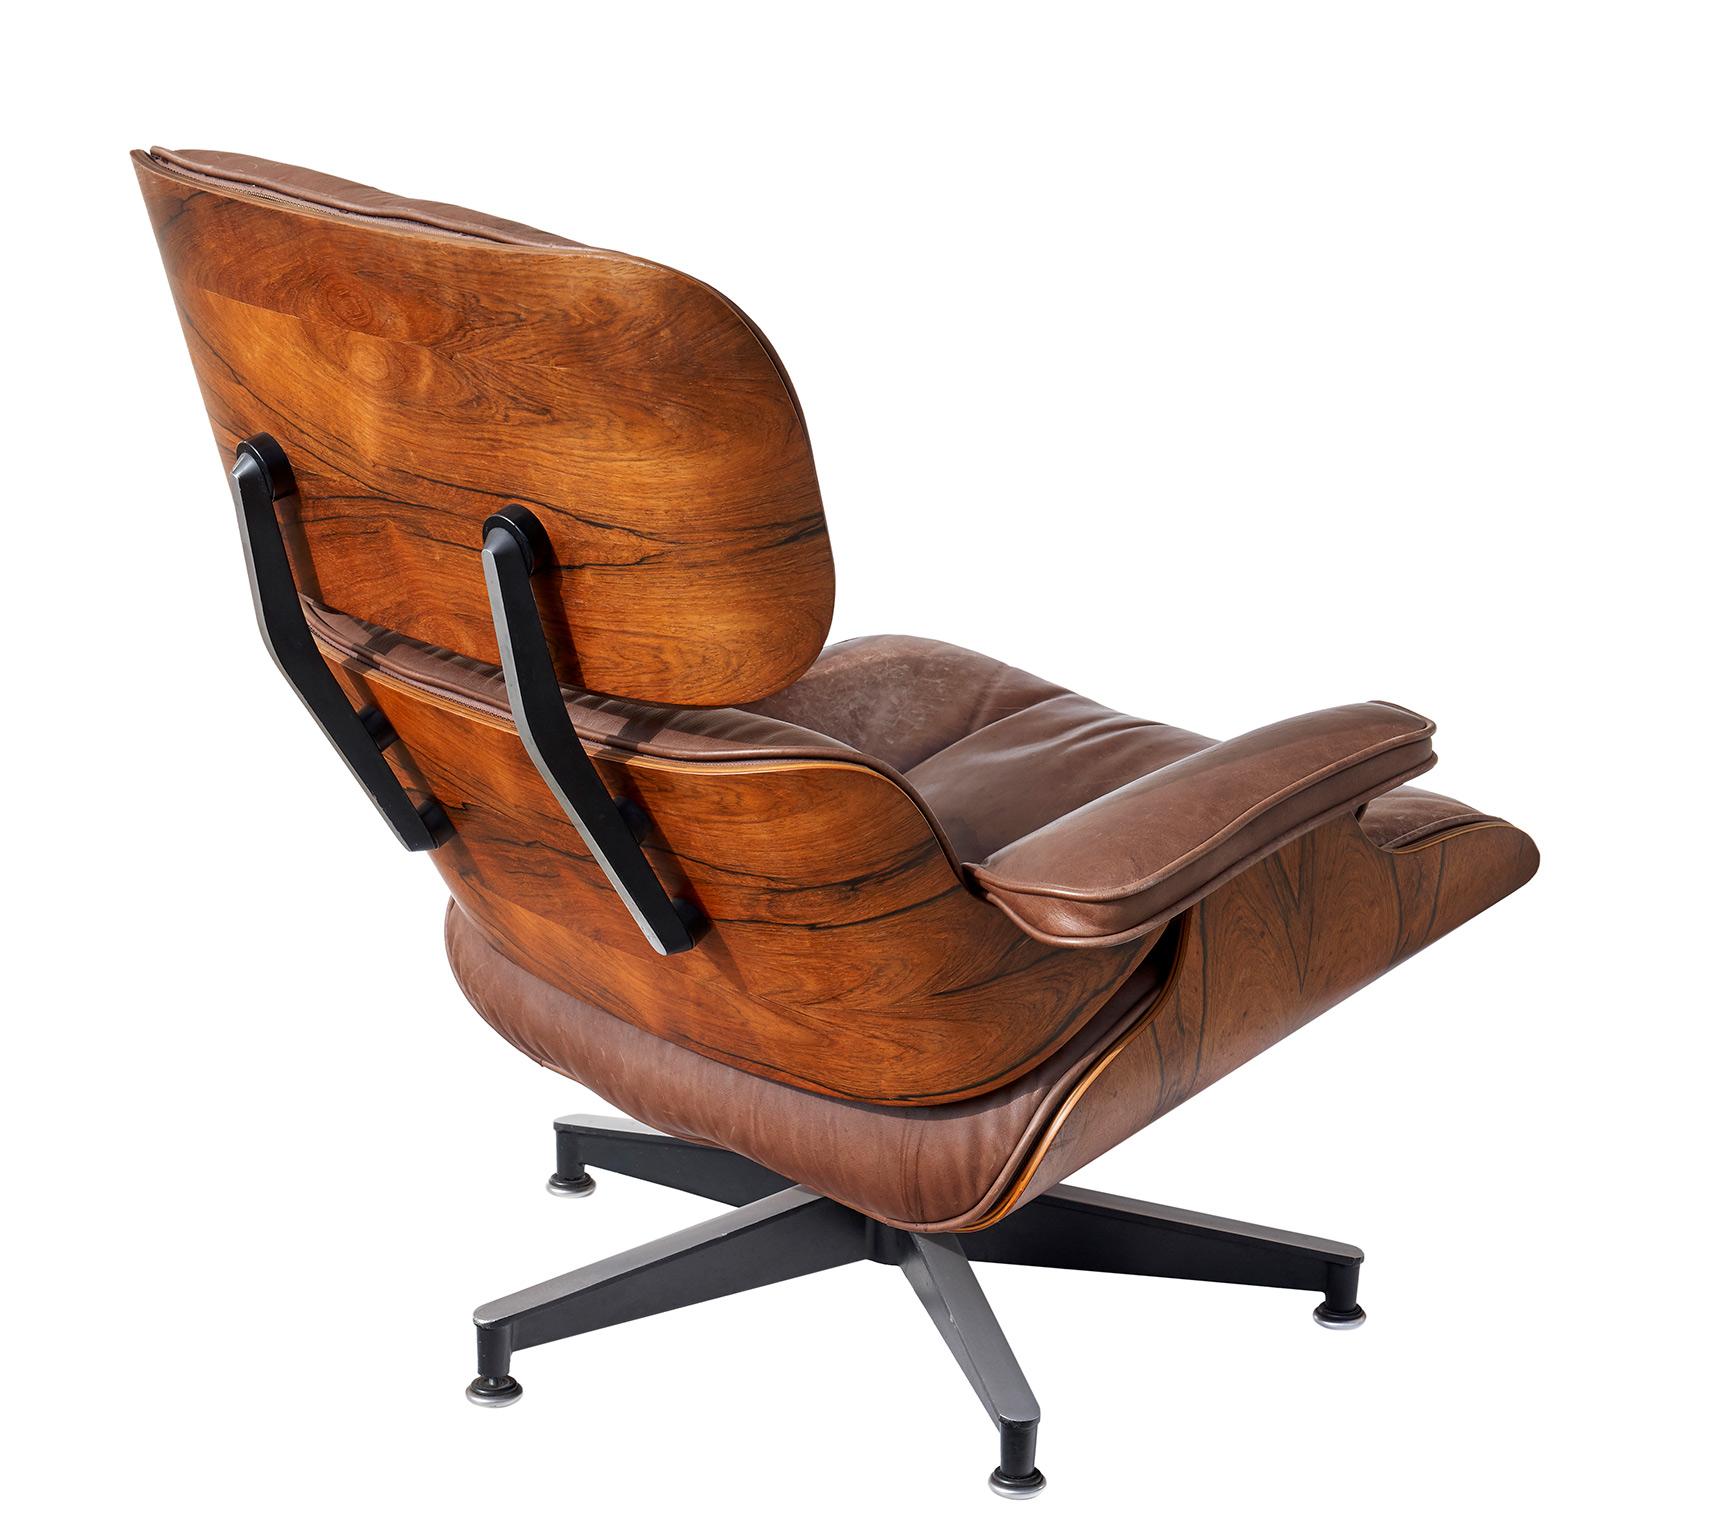 Notwithstanding its status as a sophisticated international design icon beloved by Italian architects and American psychiatrists, the Eames 670/671 is never imposing or intimidating. It is an old friend, a timeless and very cozy means for relaxing